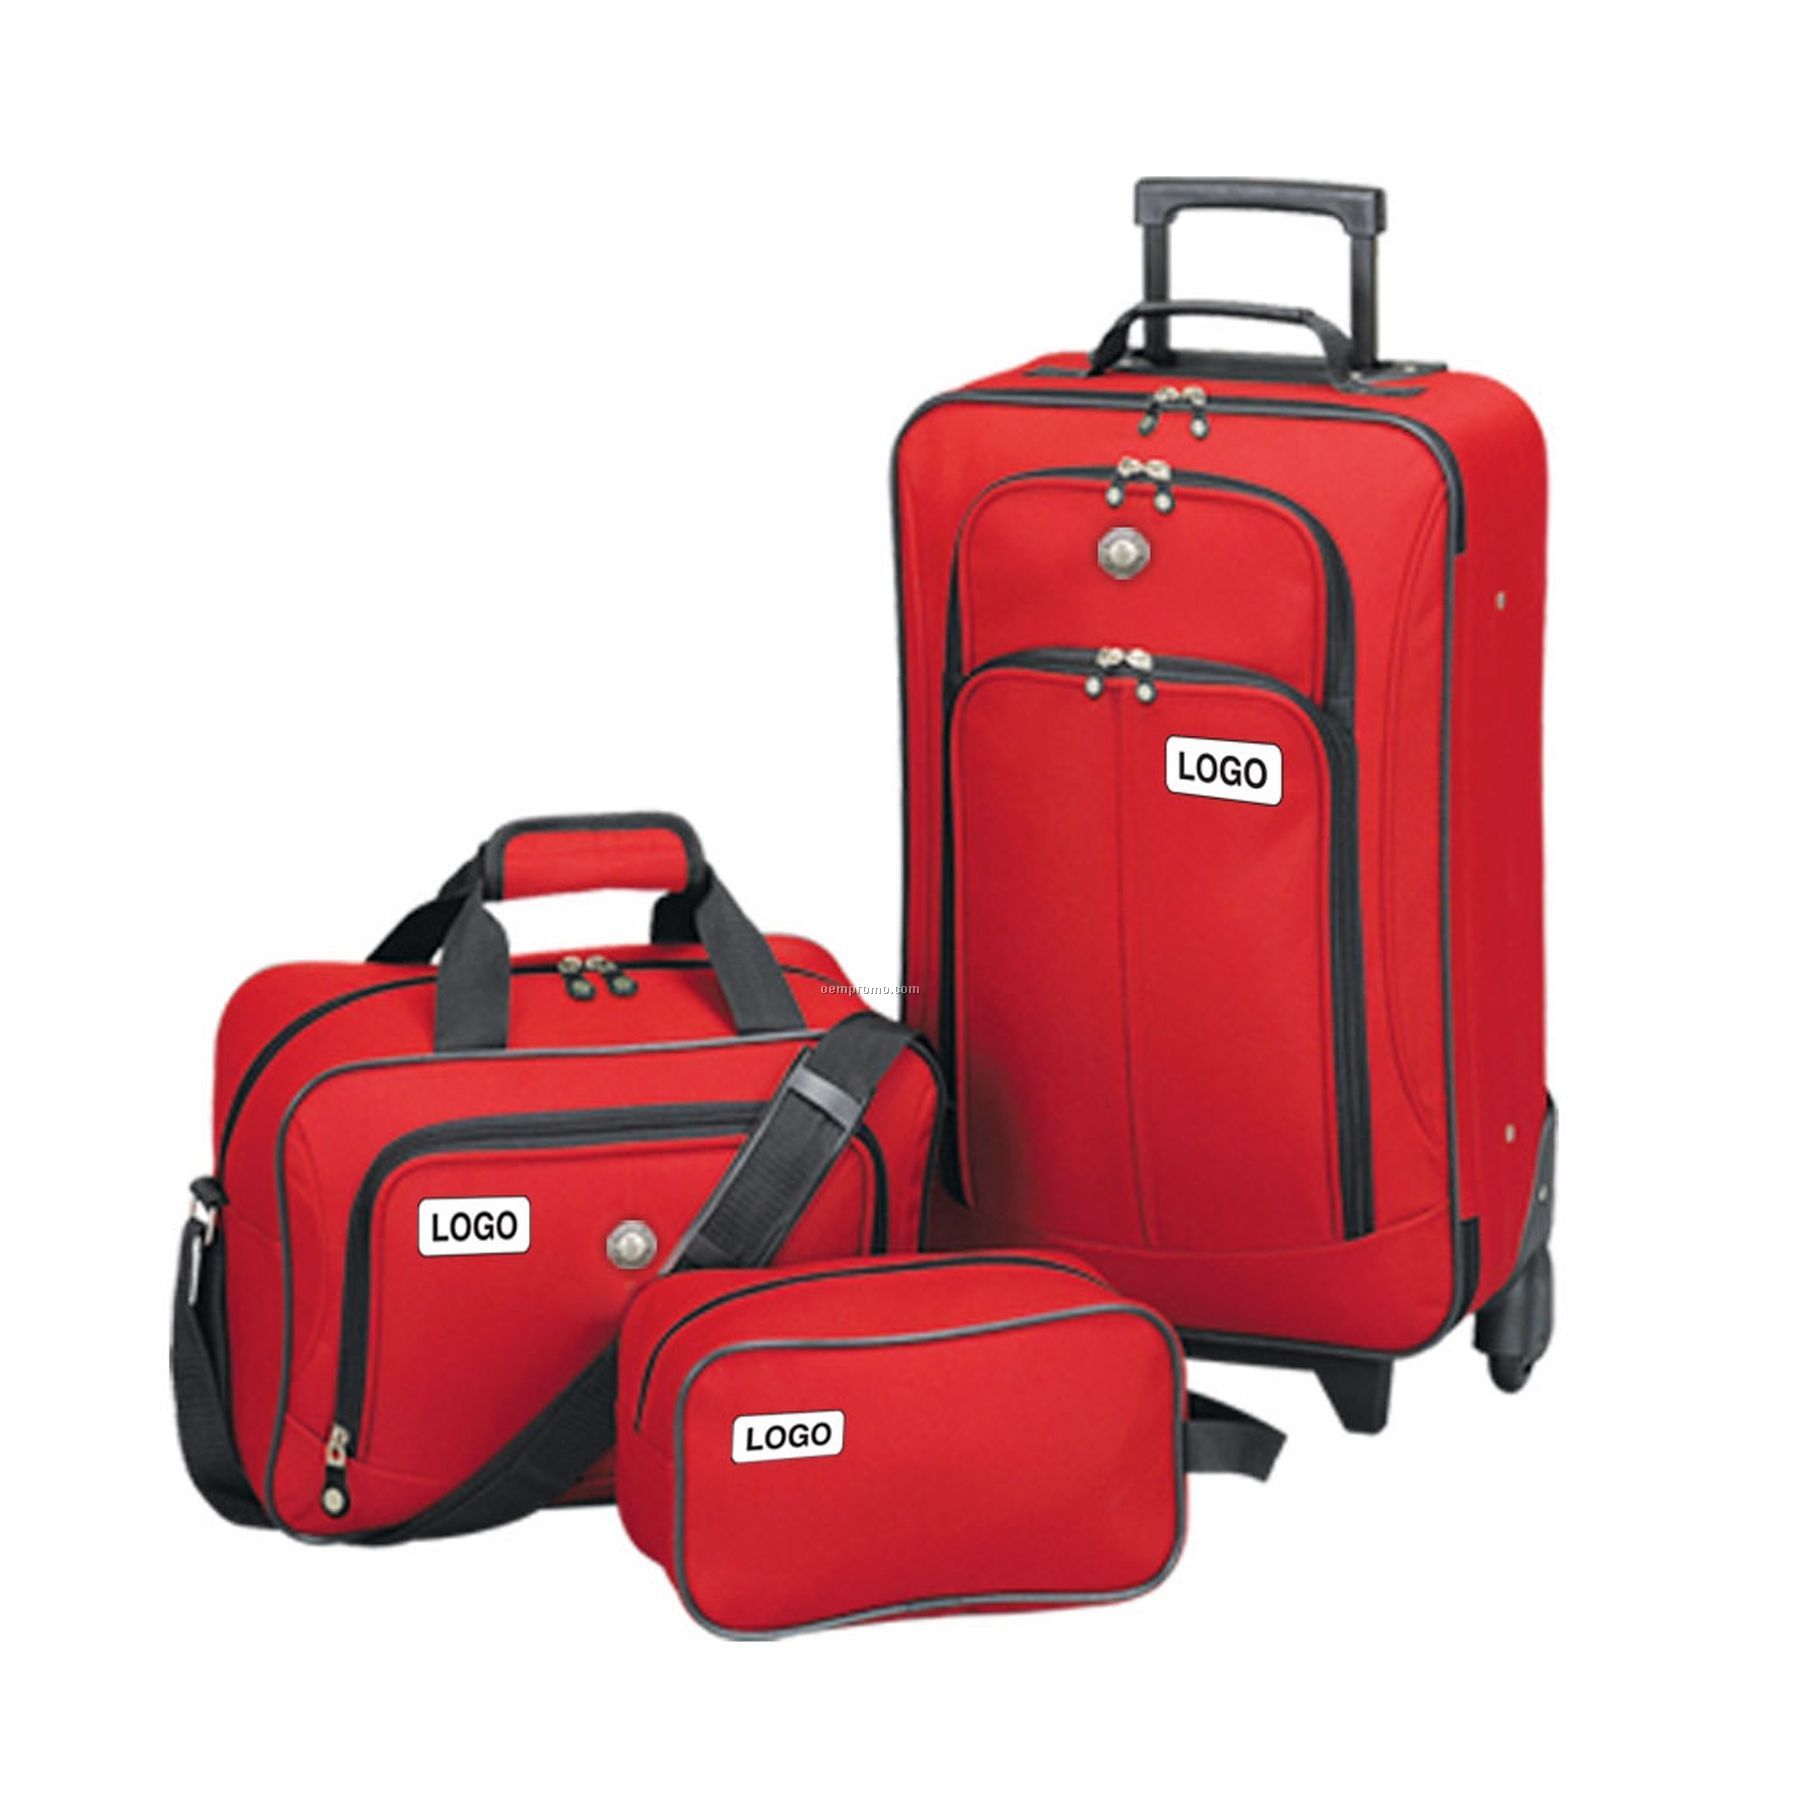 3 Piece Euro Value II Collection Luggage Set